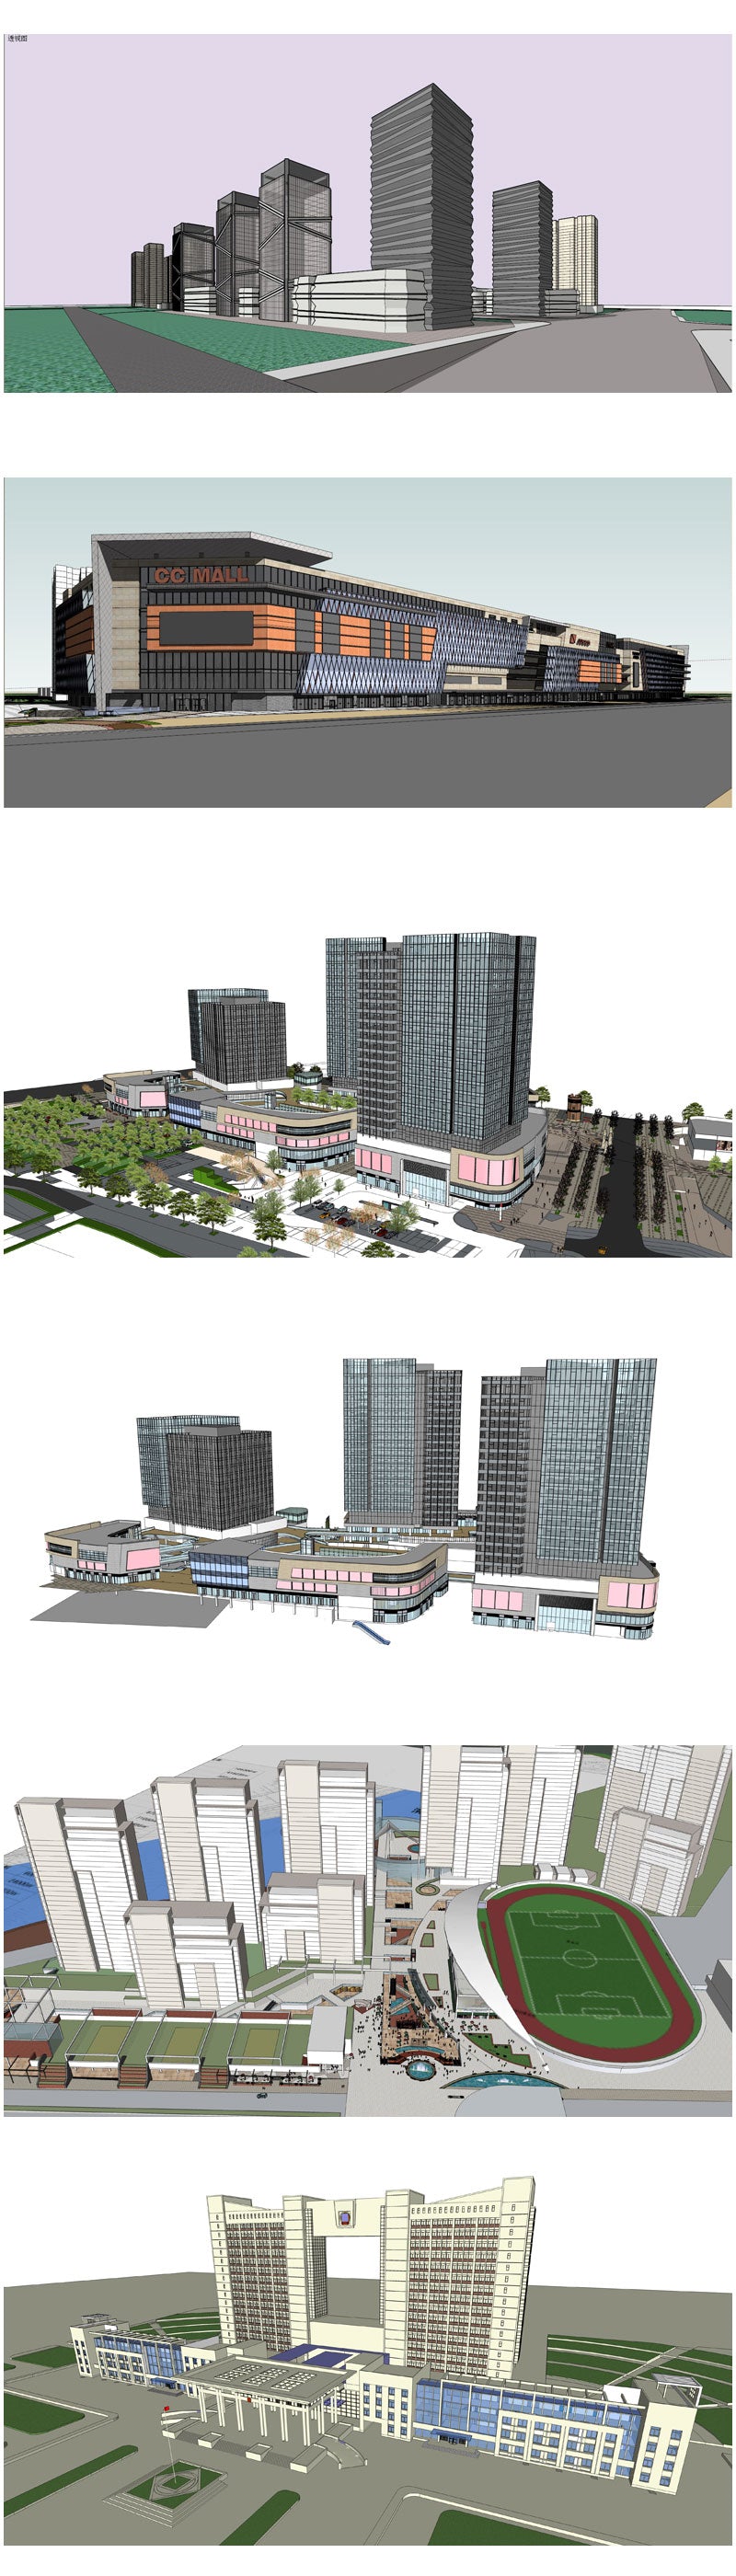 ★Best 20 Types of City,Residential Building Sketchup 3D Models Collection(Recommanded!!)